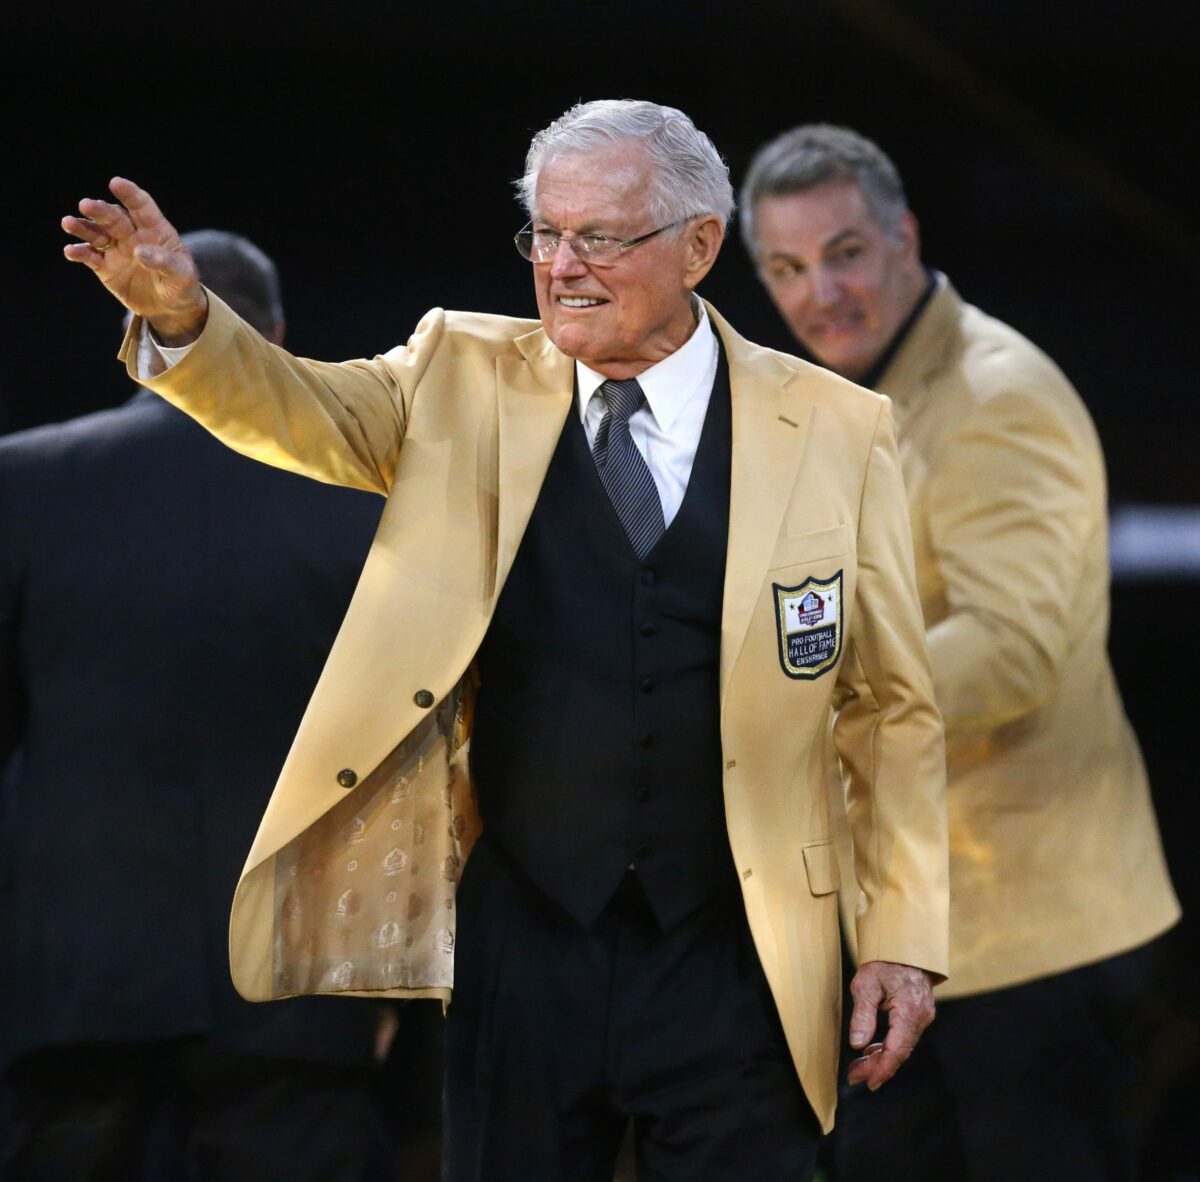 Watch: Former Eagles head coach Dick Vermeil receives his gold Hall of Fame jacket